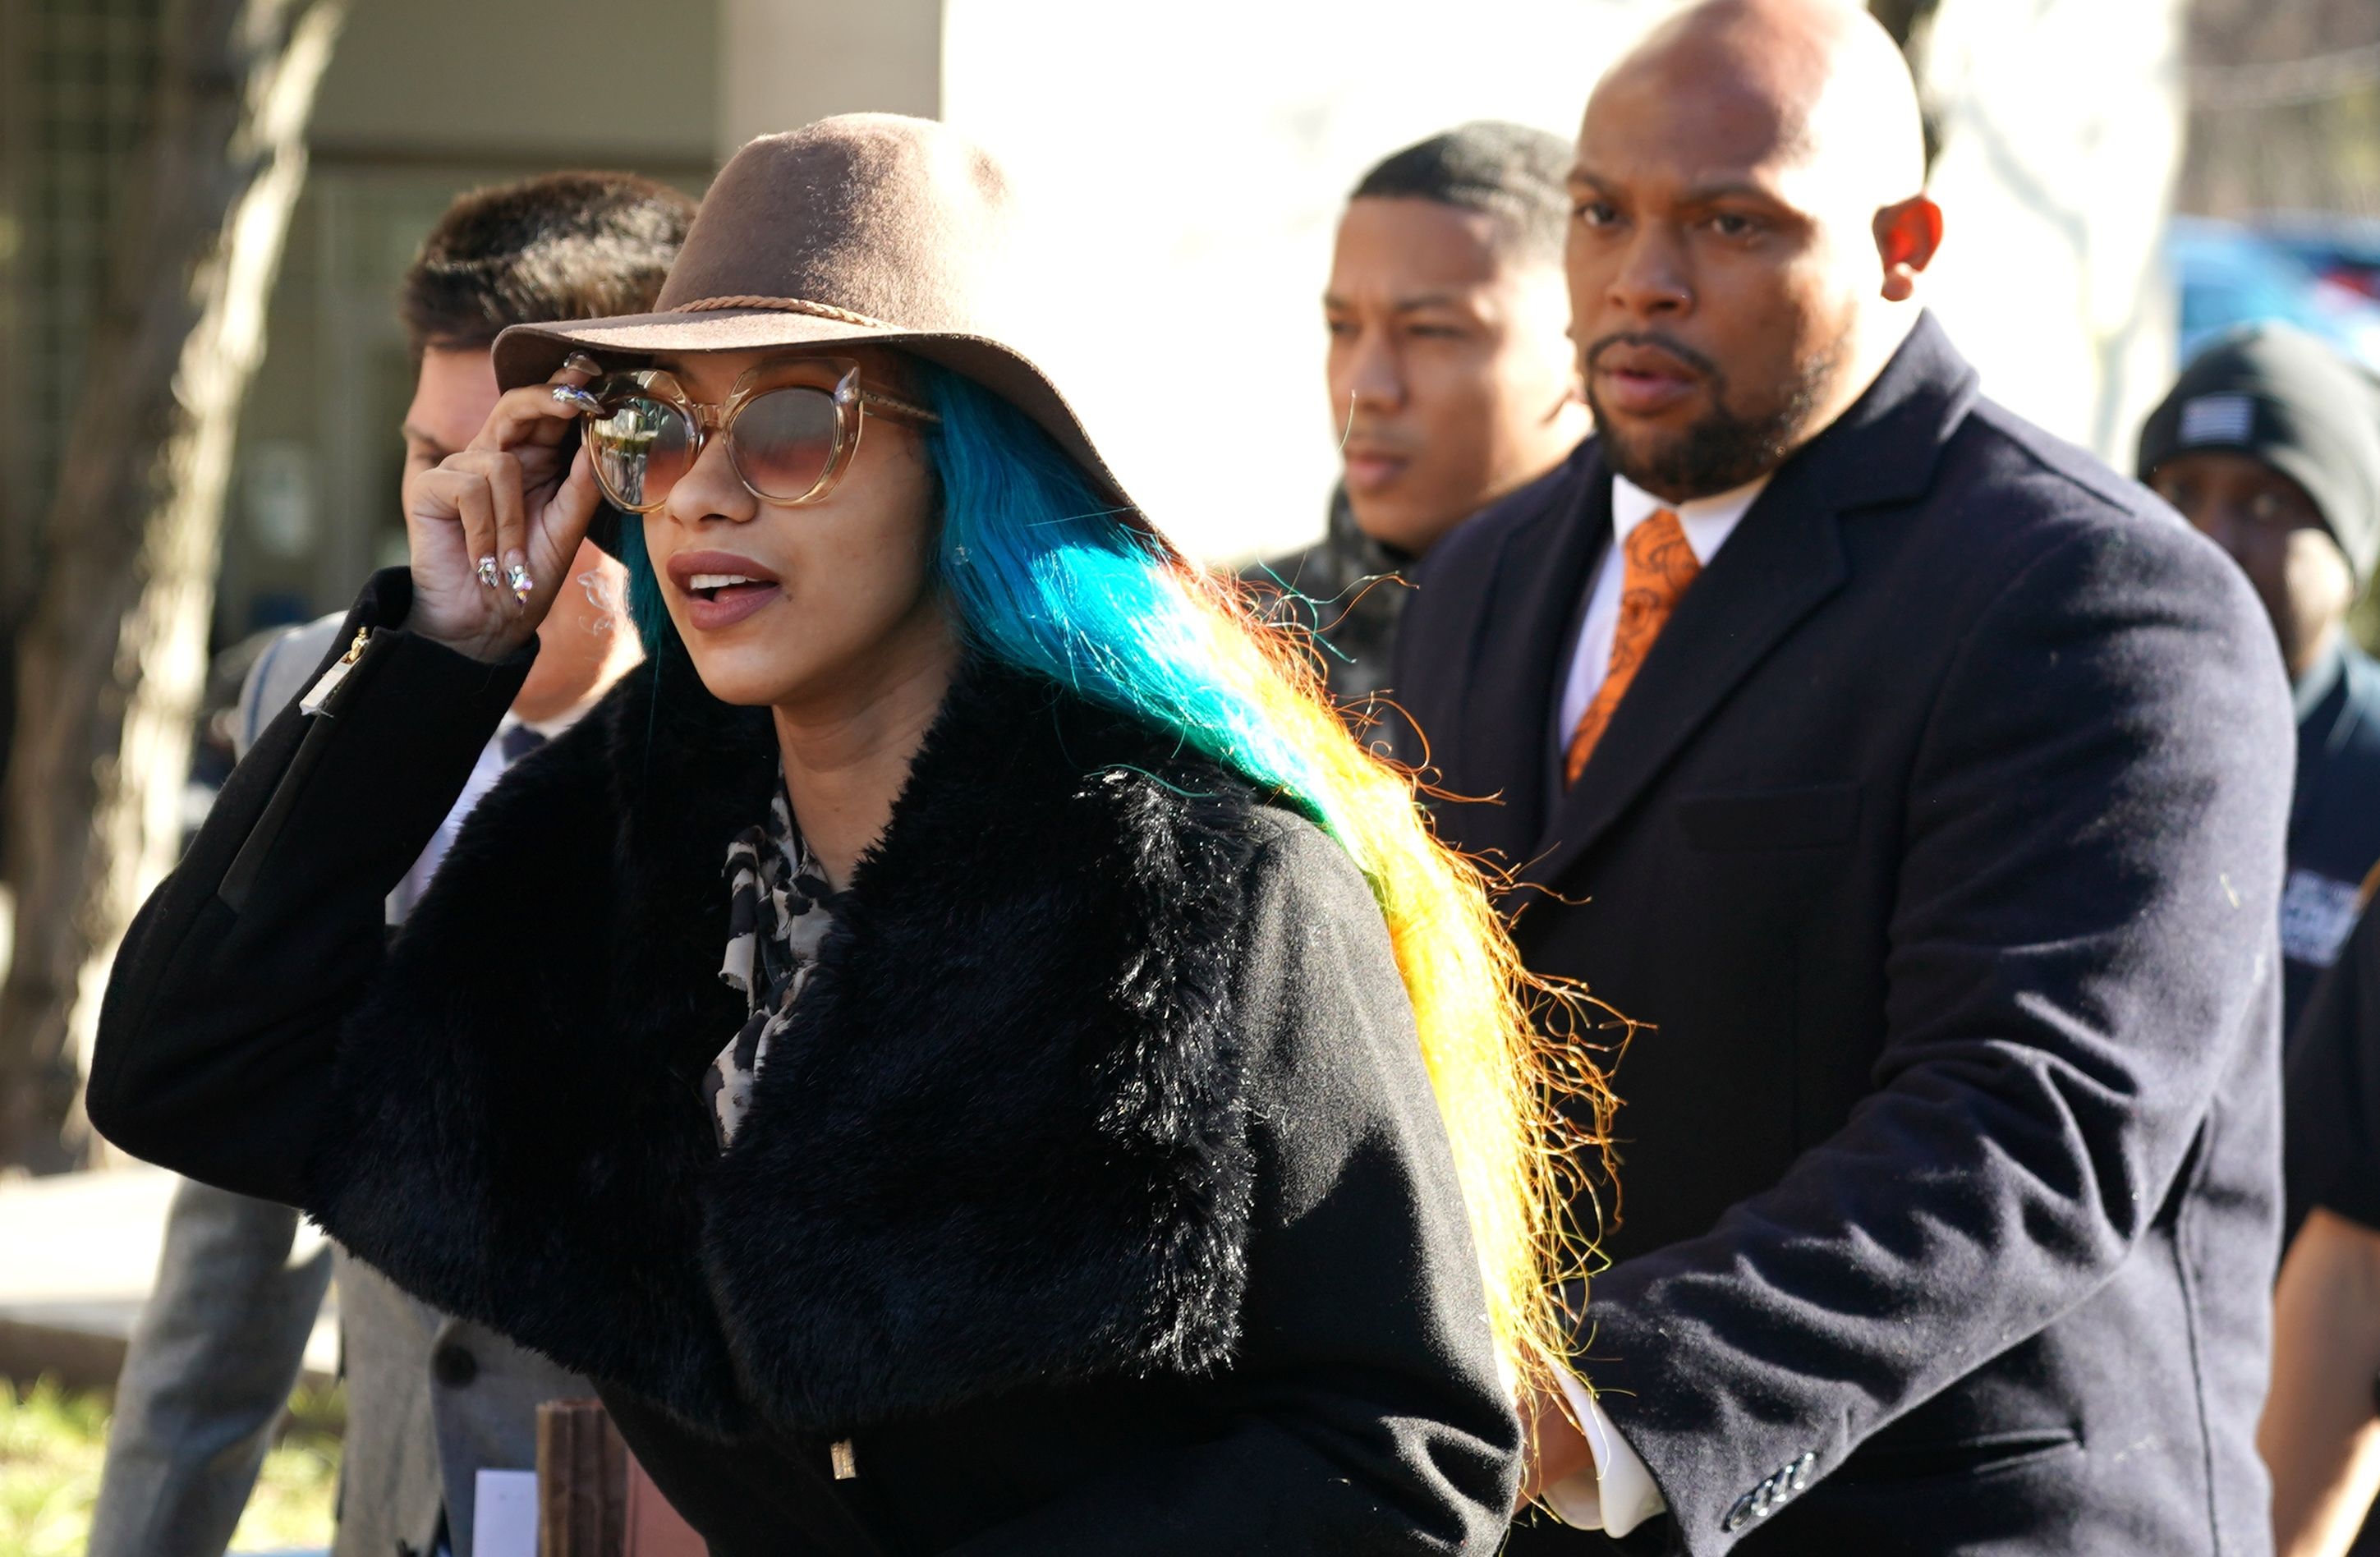 Cardi B Shows Up to Court in All-White and Shades for Alleged Strip Club  Brawl